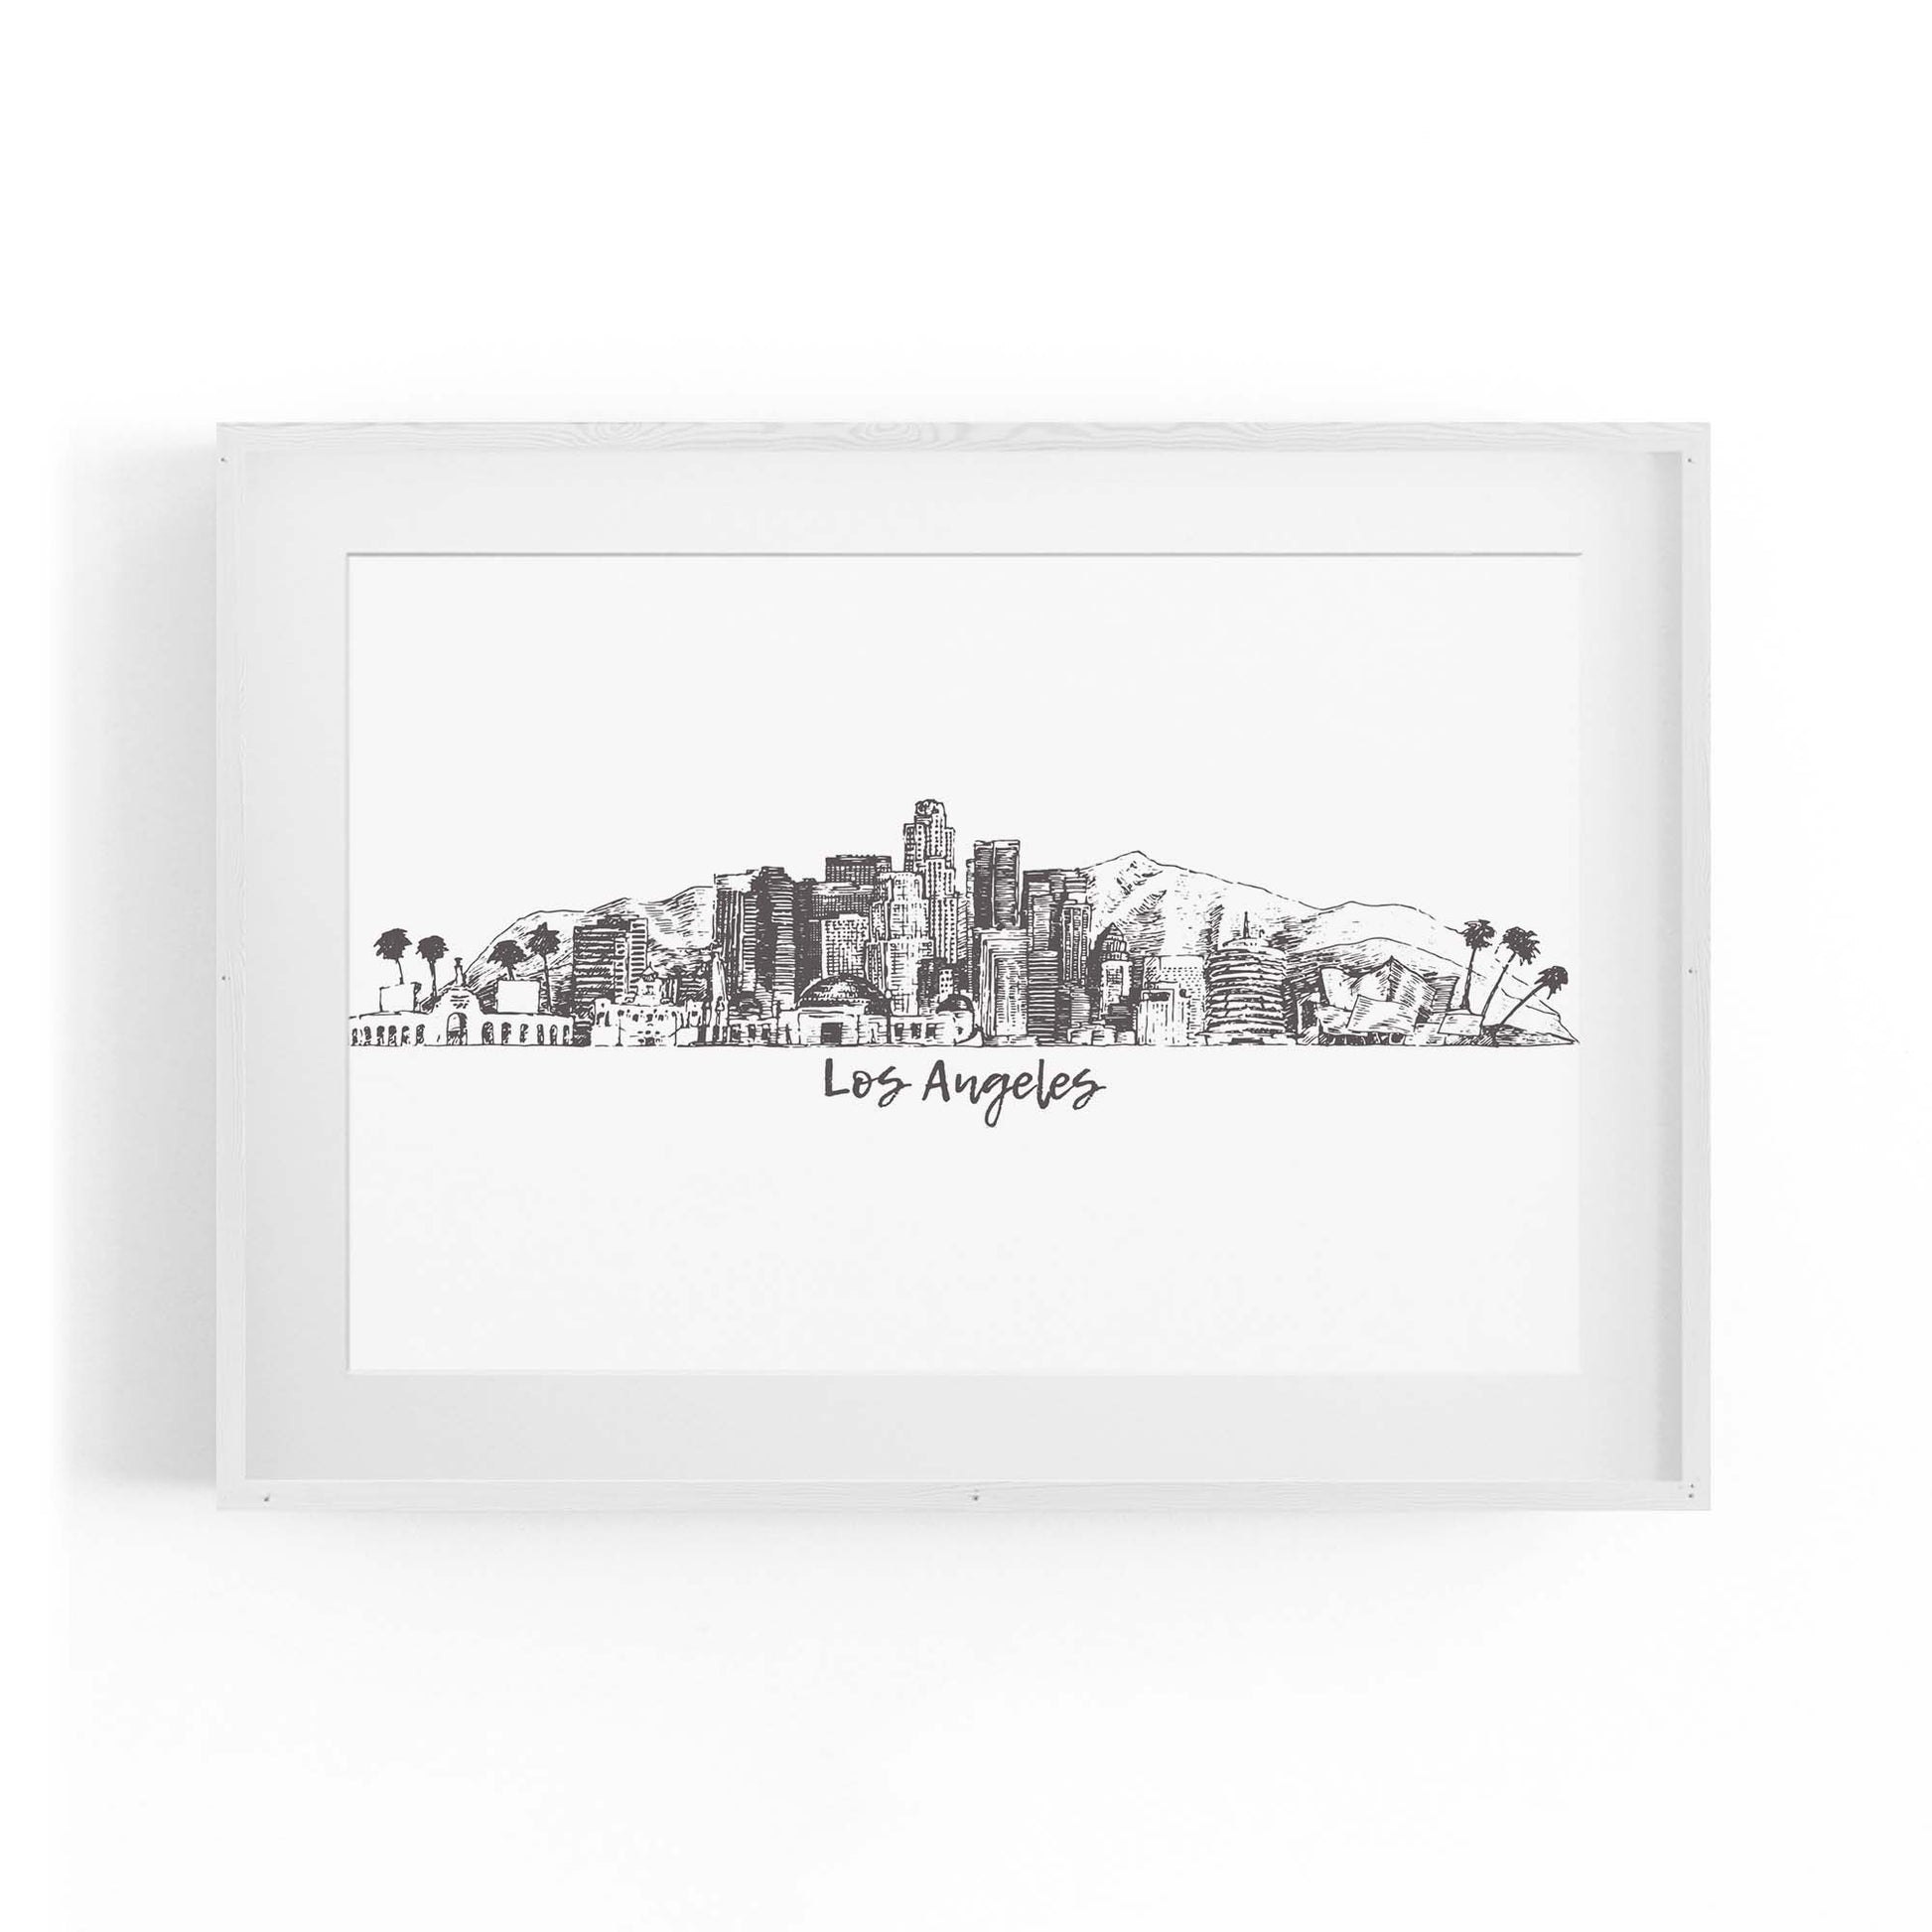 Los Angeles California Cityscape Drawing Wall Art #1 - The Affordable Art Company